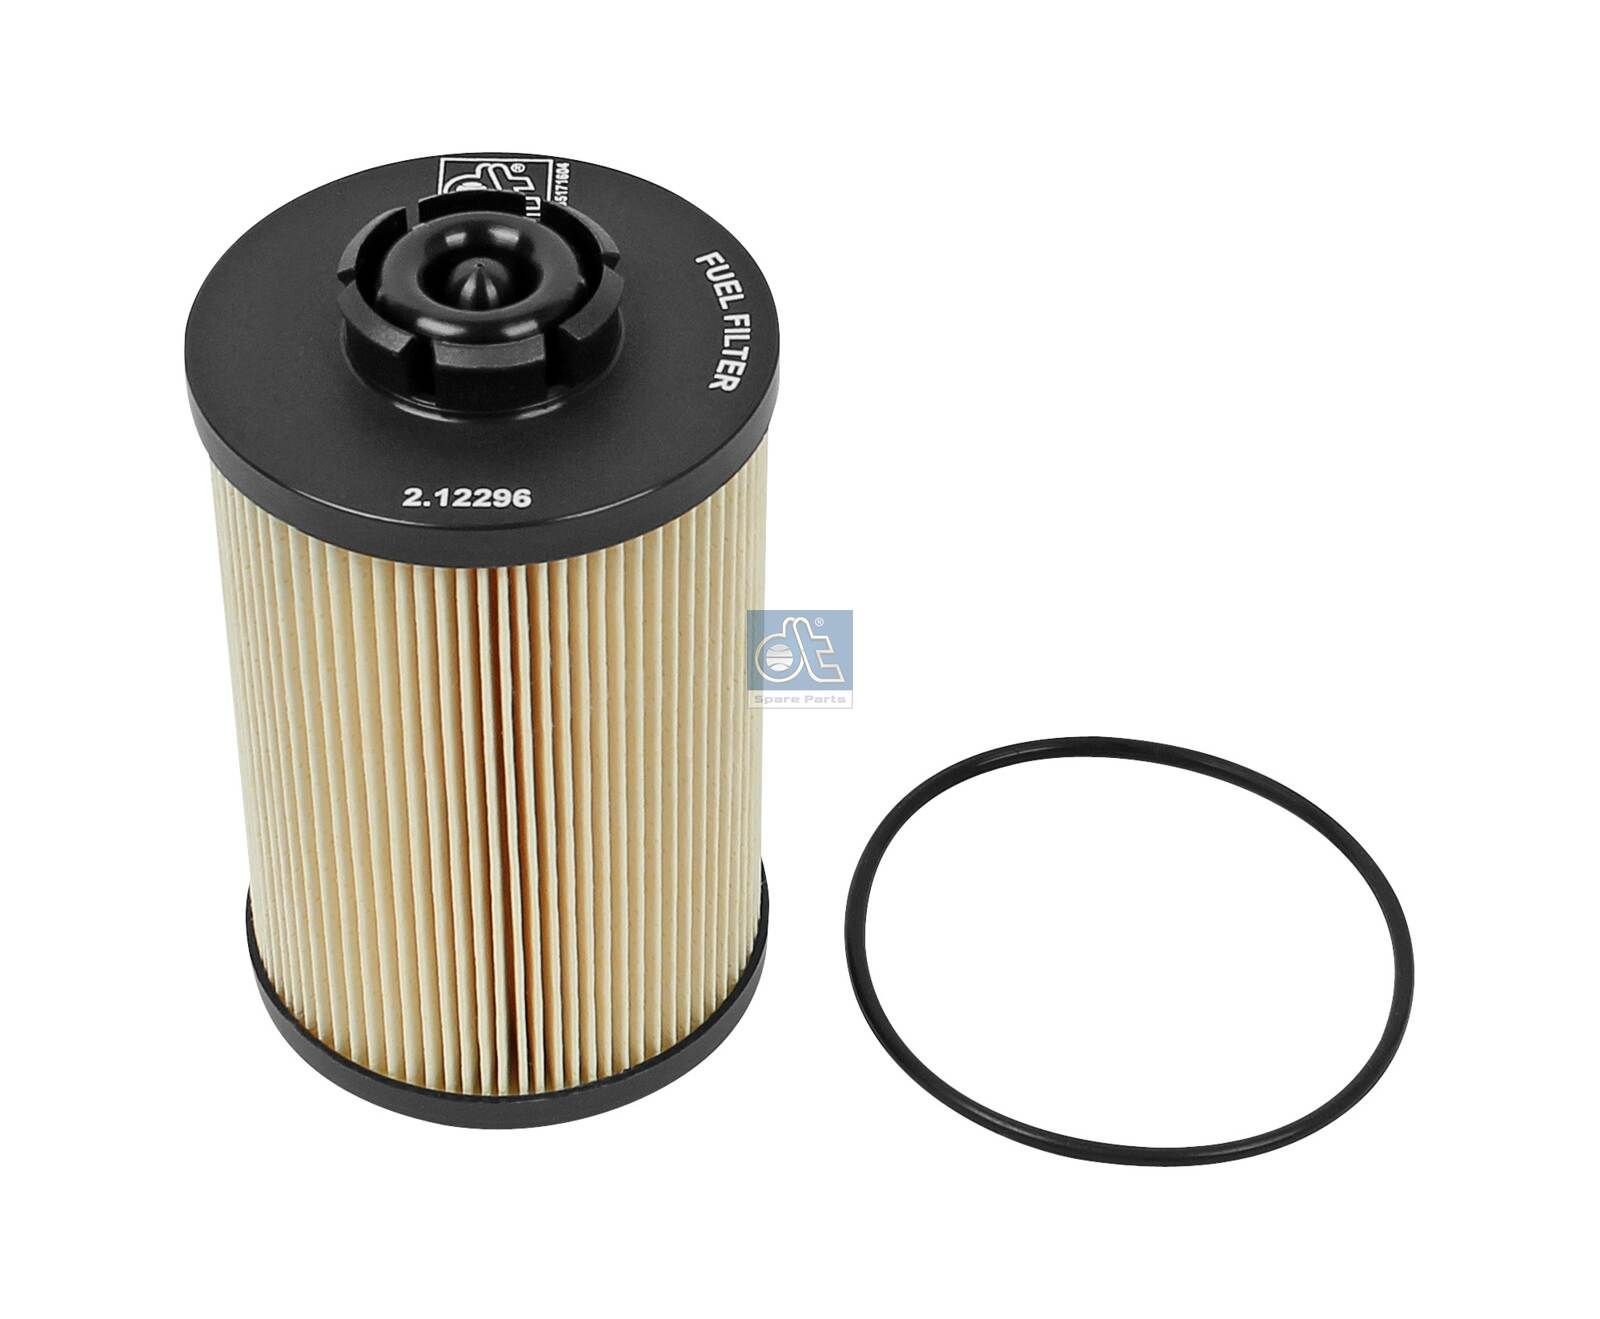 PU 1058X DT Spare Parts 2.12296 Fuel filter 7421691773